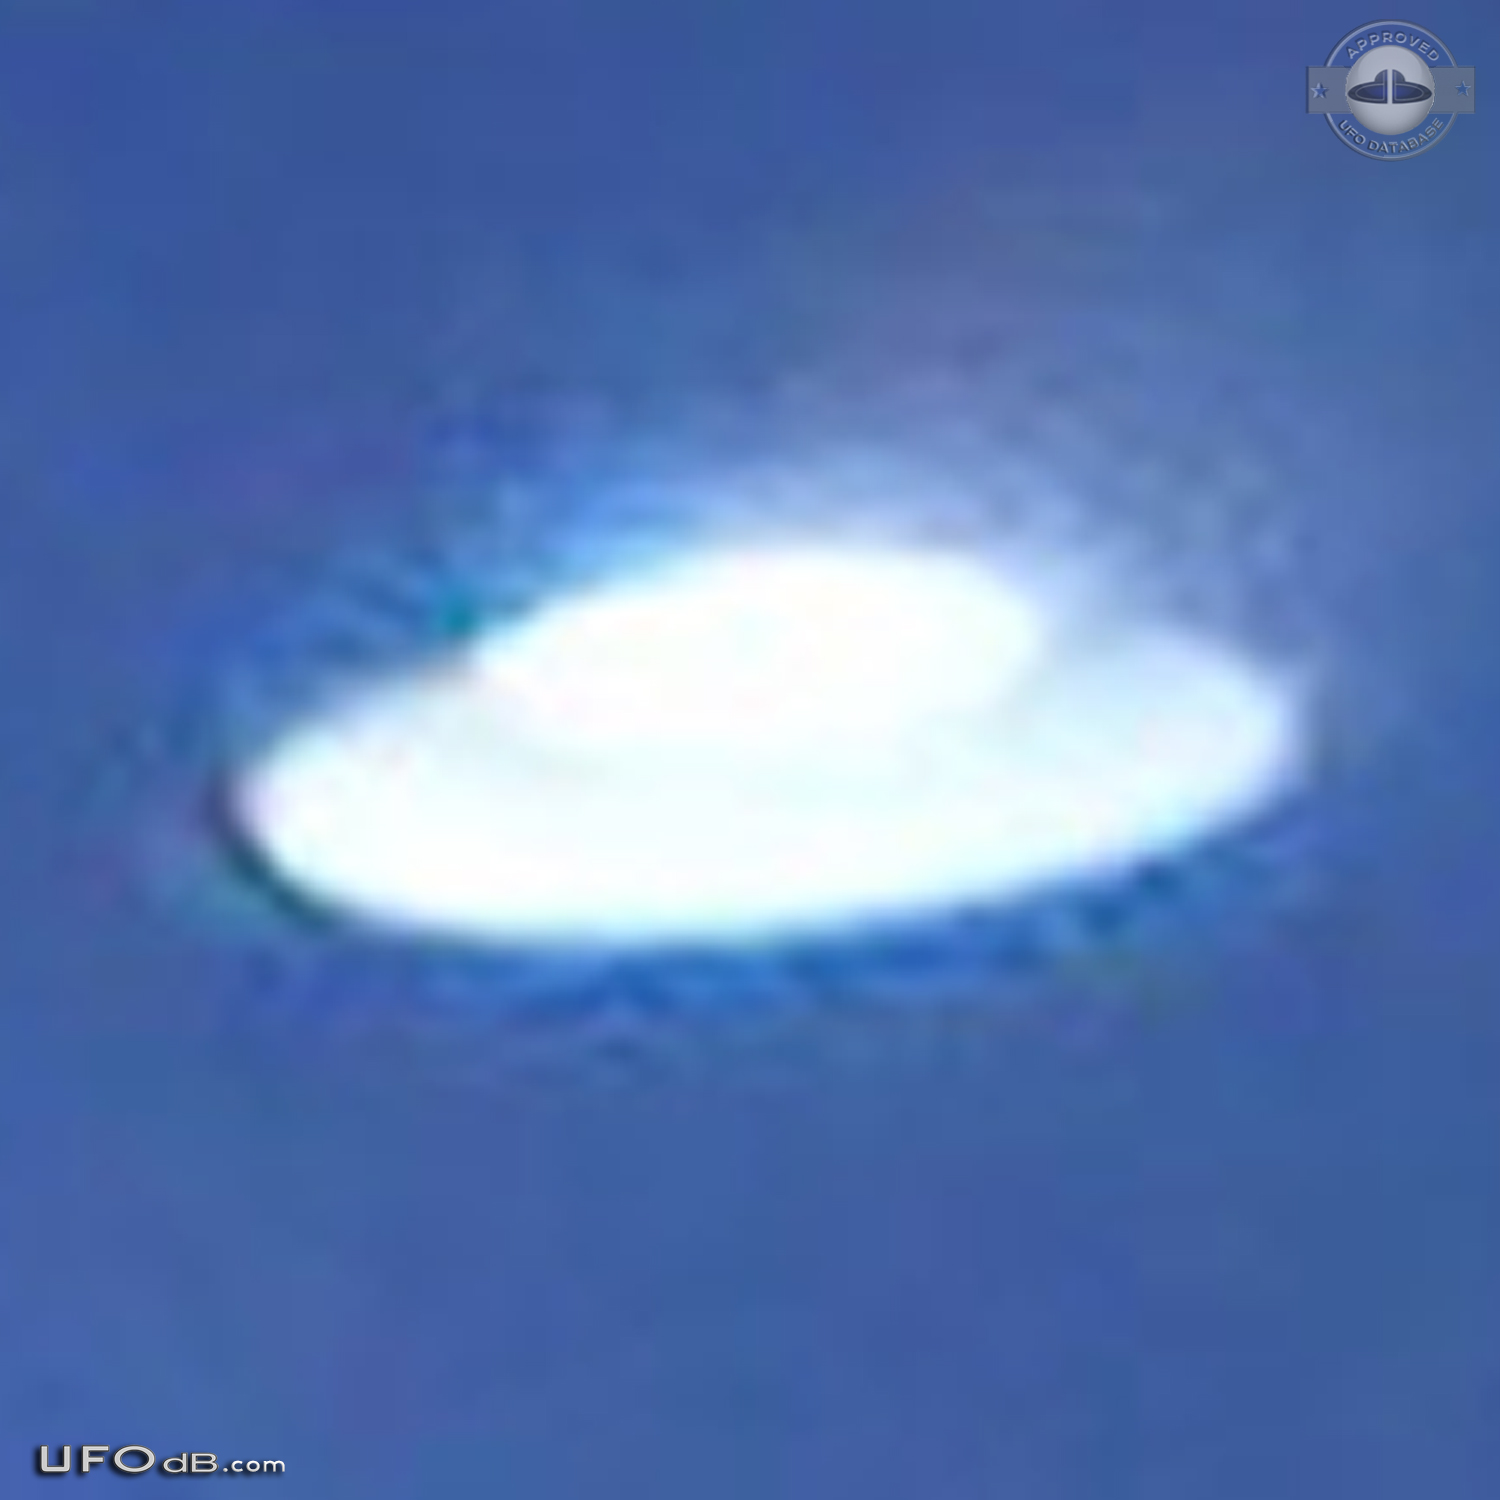 Two Saucer with dome UFOs caught on Picture in the Bahamas - 2012 UFO Picture #495-5